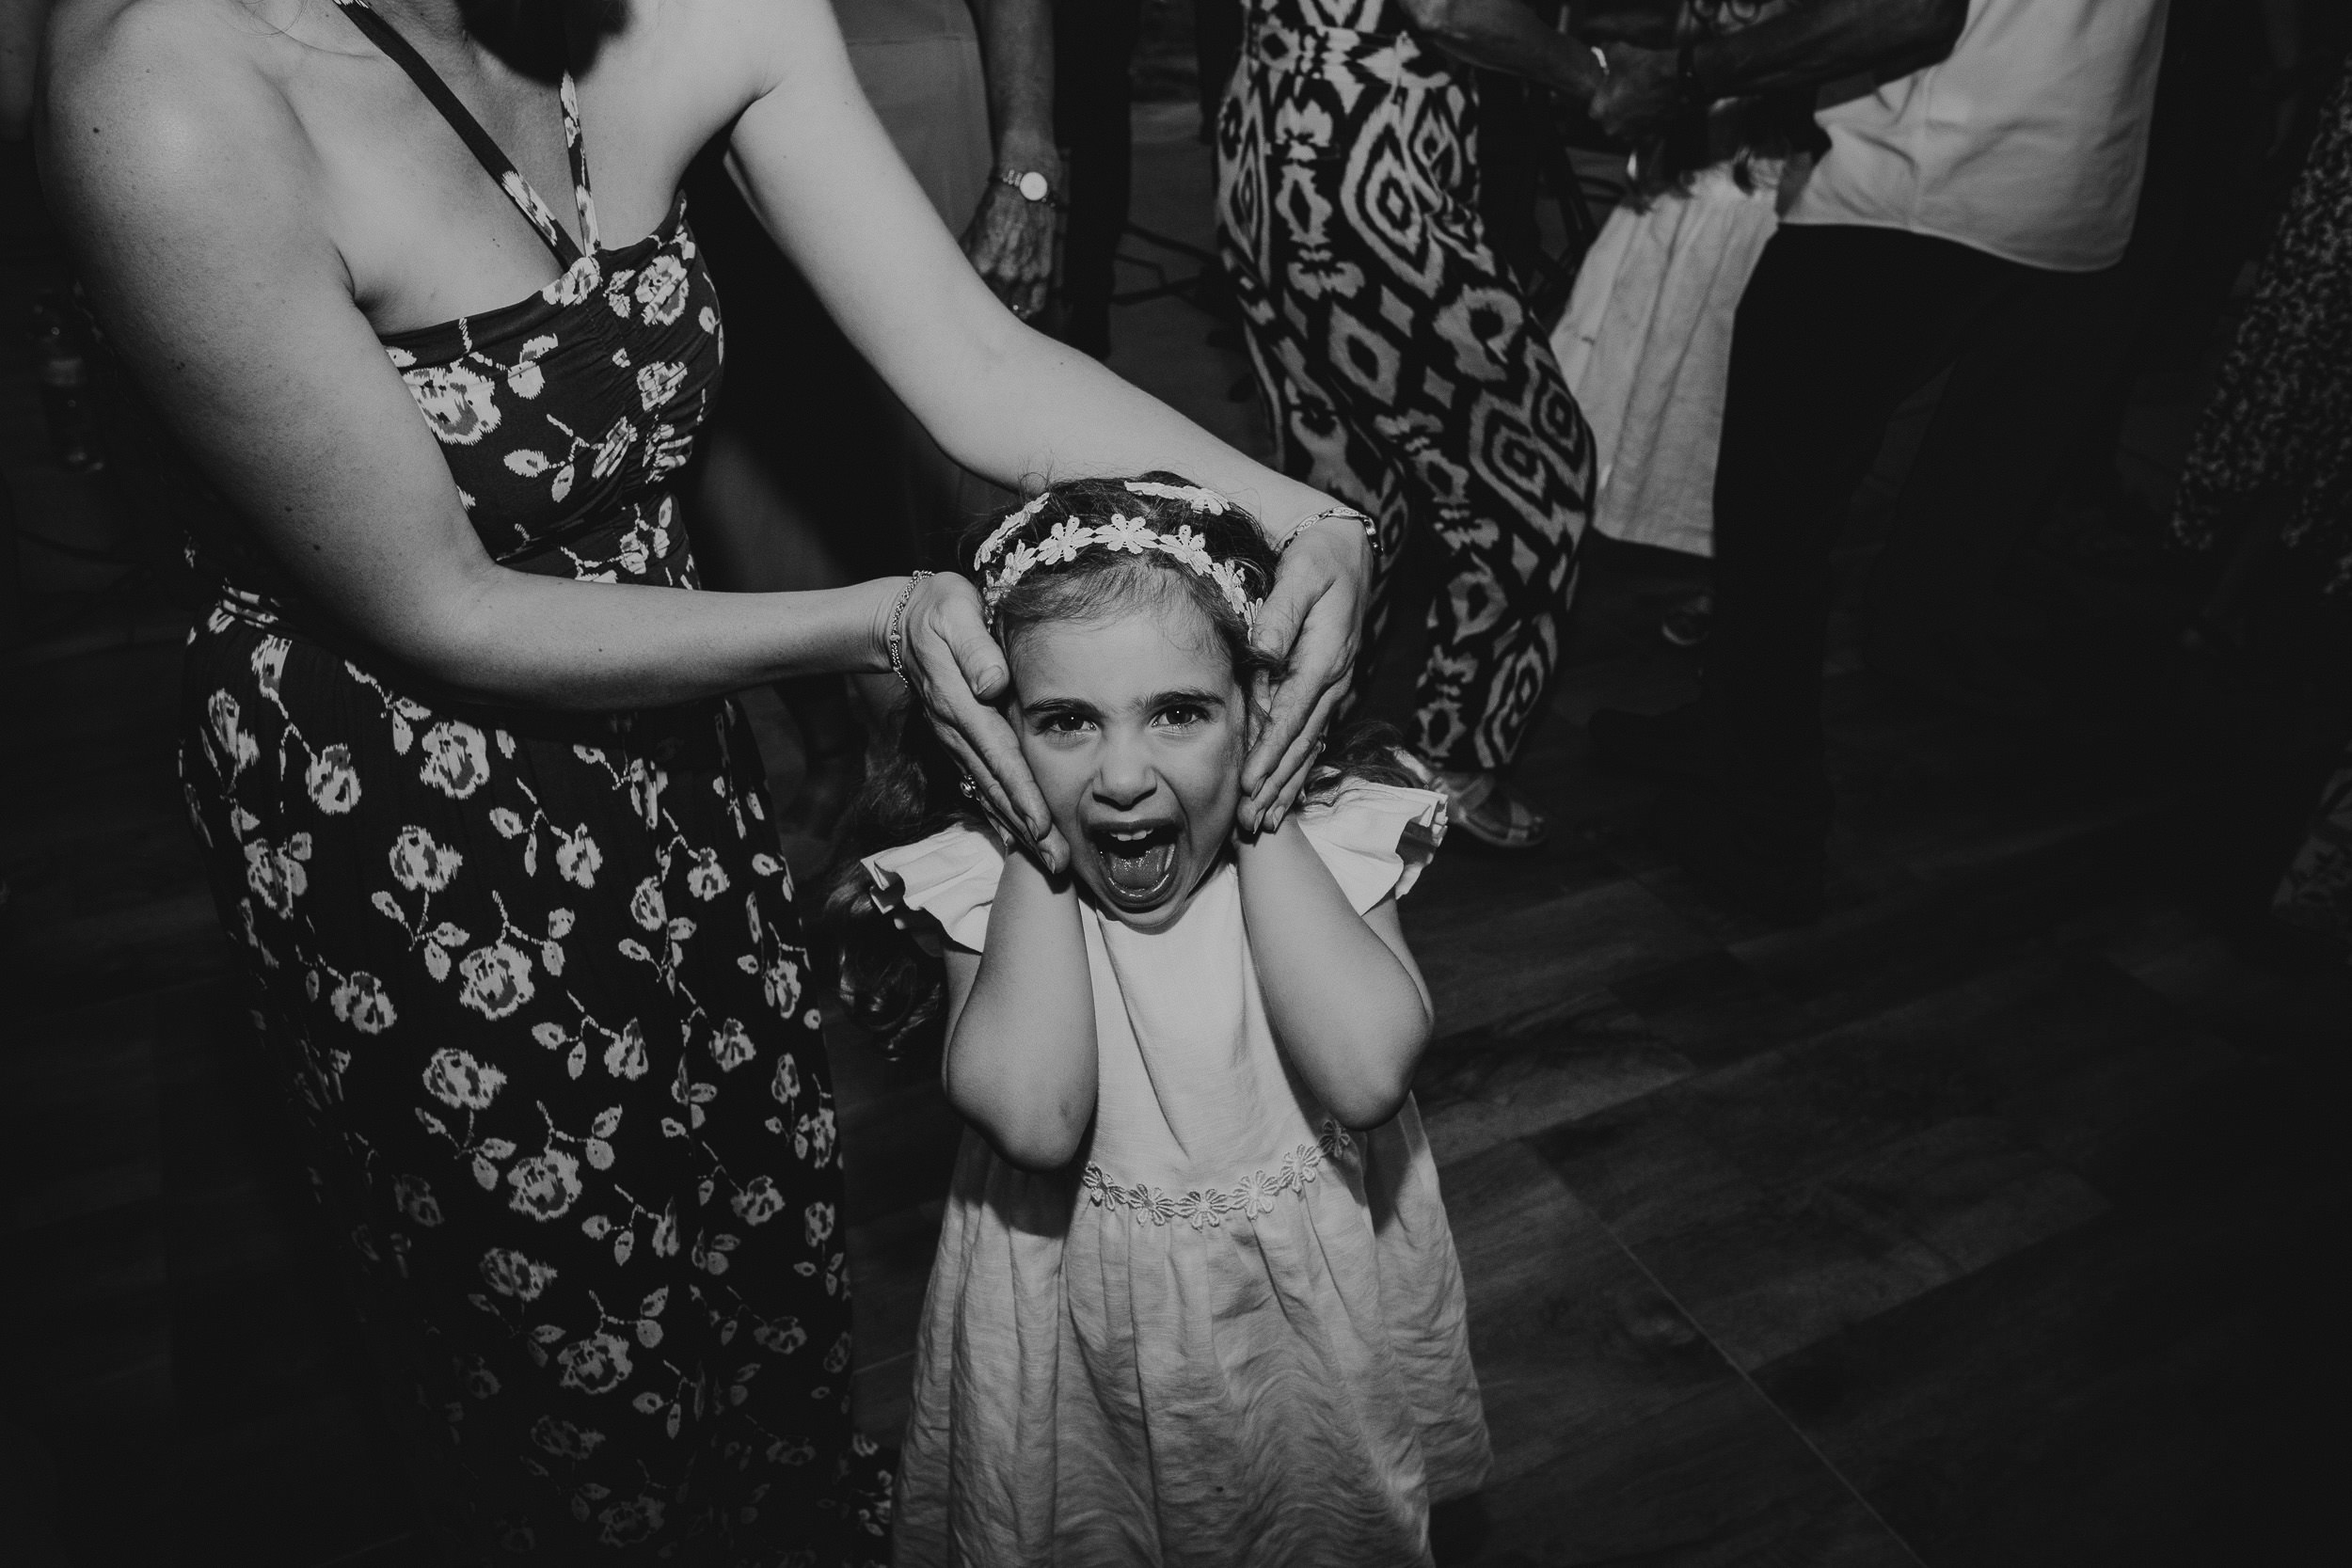 A little girl is being kissed by the bride on the dance floor at a wedding.